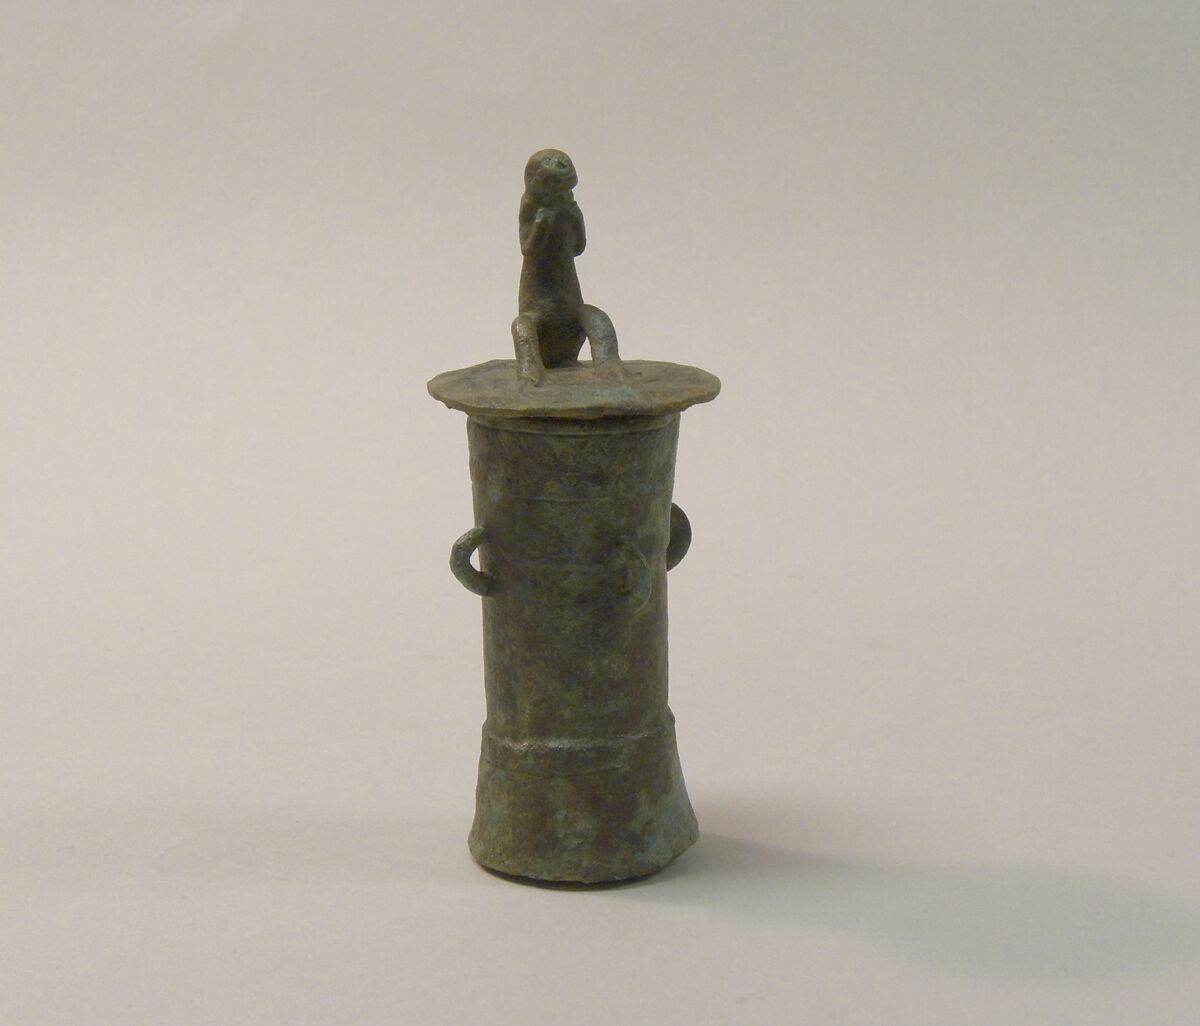 Lime Container in the Form of a "Mloko" Drum Surmounted by a Crouching Figure, Bronze, Indonesia (Java, Lumajang, Pasiran) 